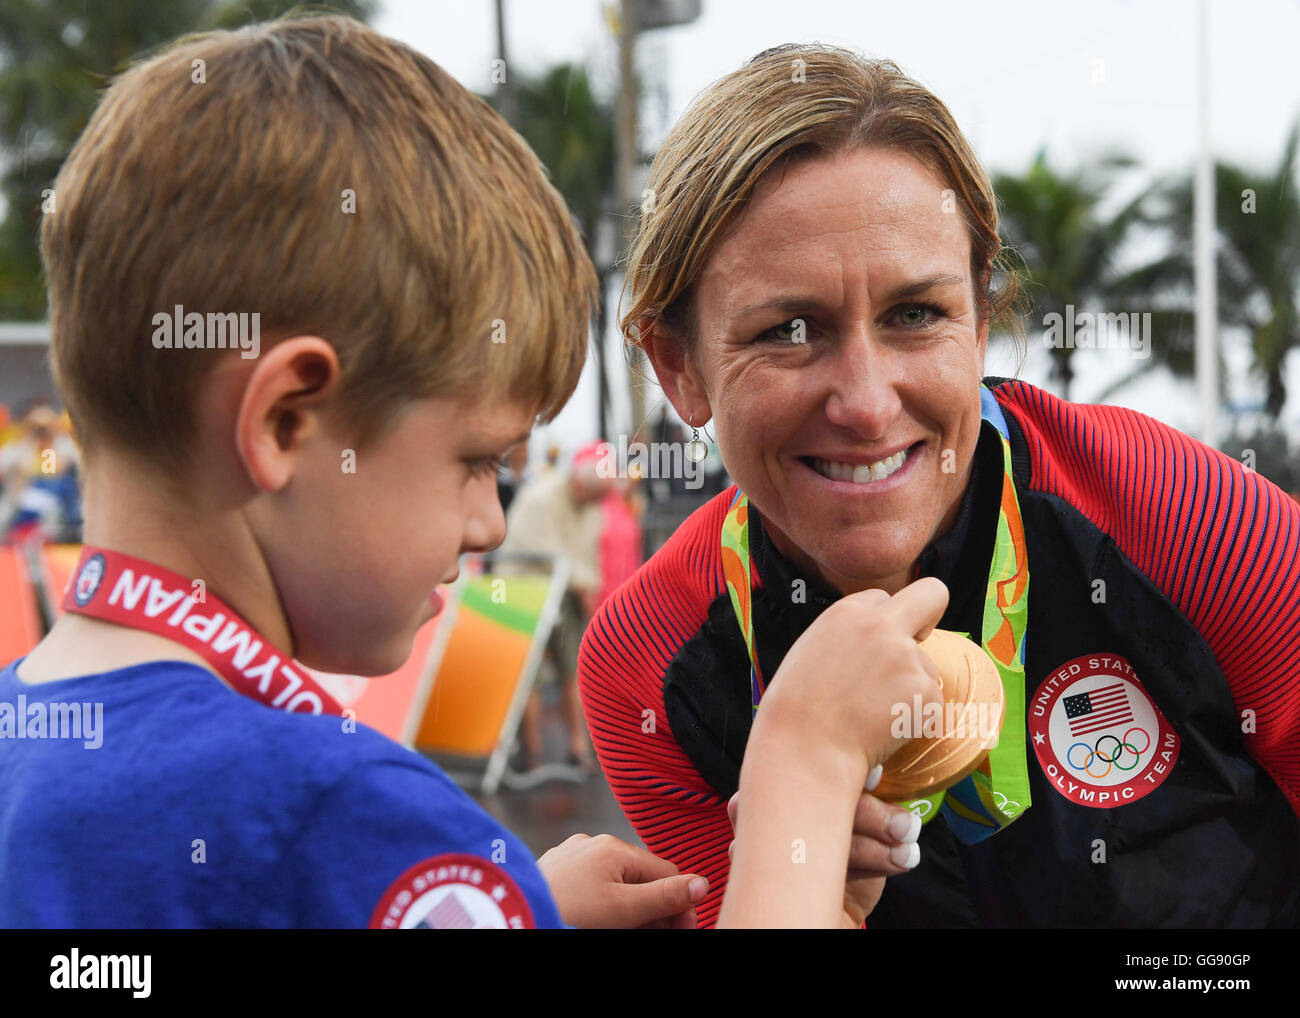 Rio de Janeiro, Brazil. 10th Aug, 2016. Kristin Armstrong of the USA shows the gold medal to her five year old son Lucas after winning the women's Individual Time Trial of the Rio 2016 Olympic Games Road Cycling events at Pontal in Rio de Janeiro, Brazil, 10 August 2016. Photo: Sebastian Kahnert/dpa/Alamy Live News Stock Photo